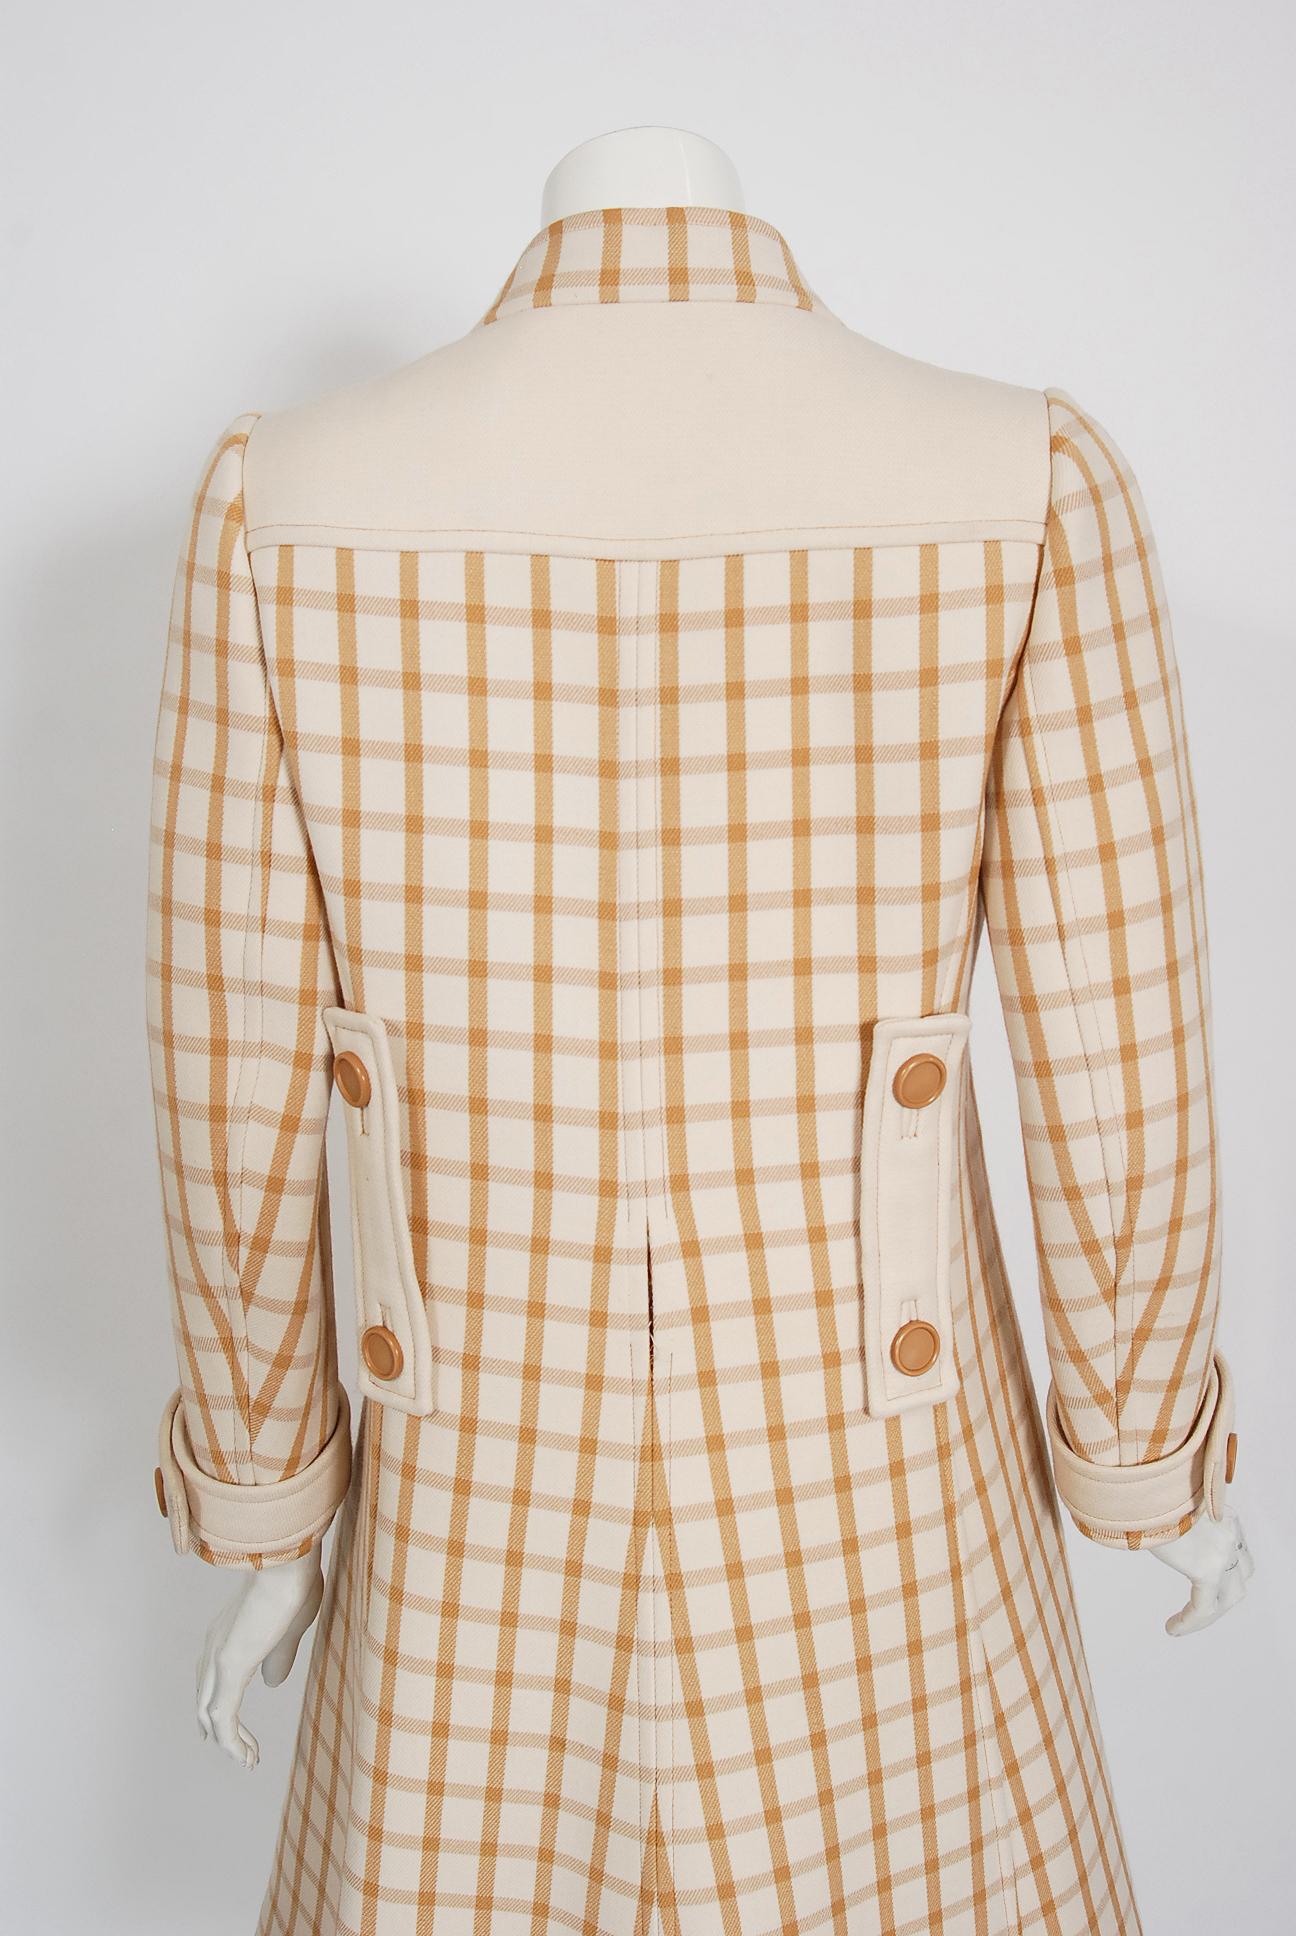 Vintage 1967 Courreges Couture Tan and Ivory Checkered Wool Mod Jacket Coat   2